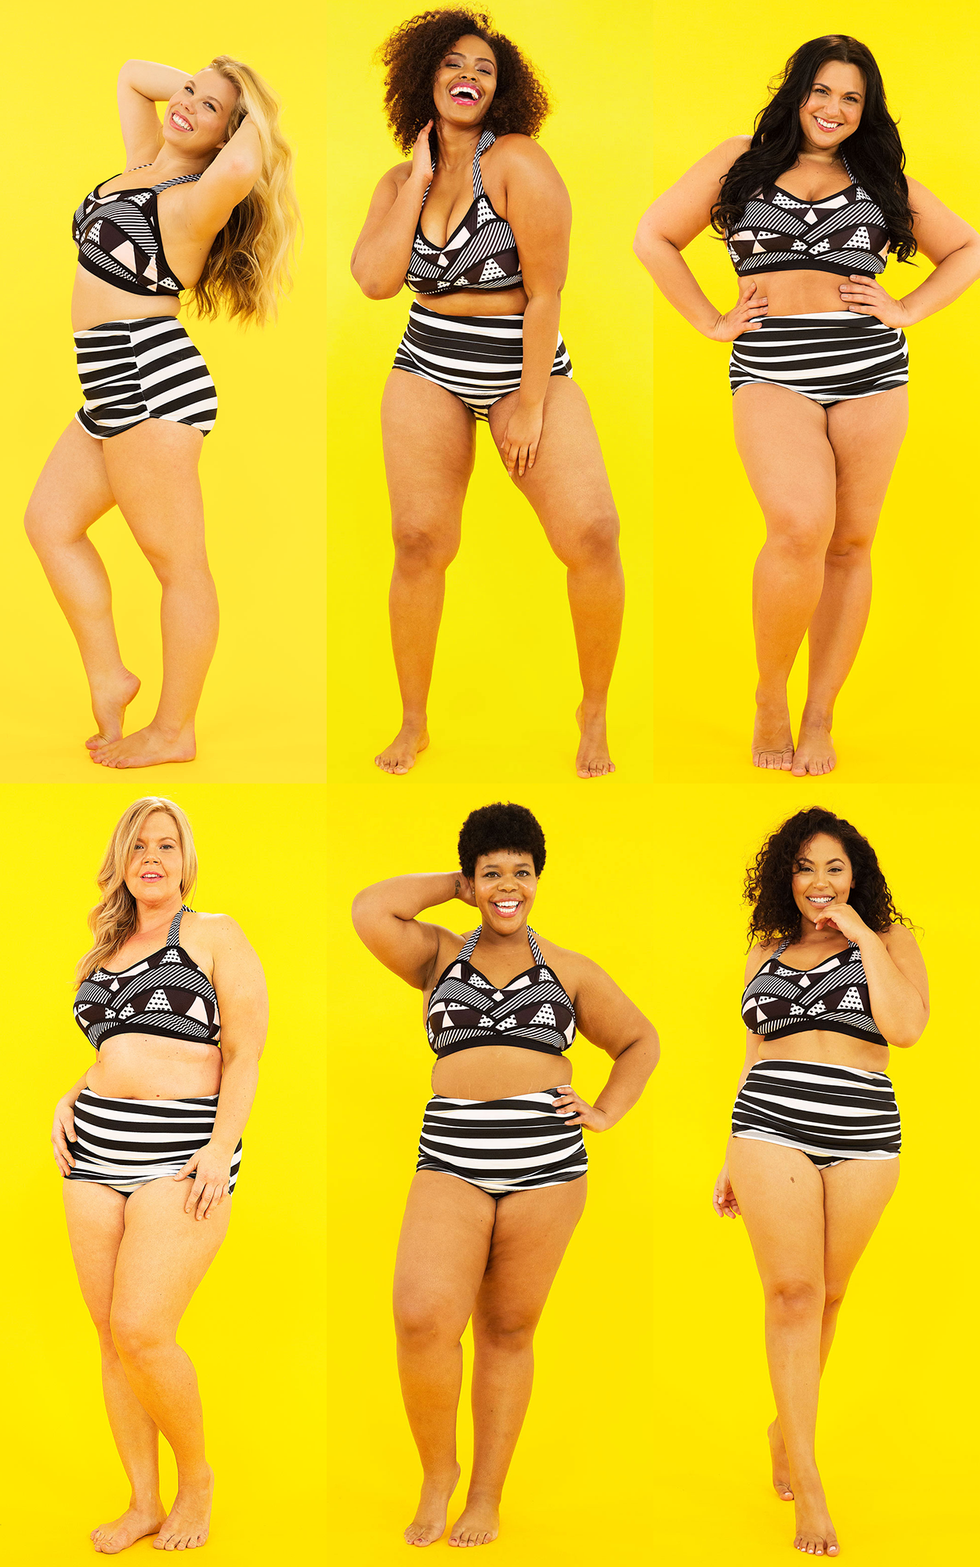 6 Women Get Real About What It's Like to Be a Size 16